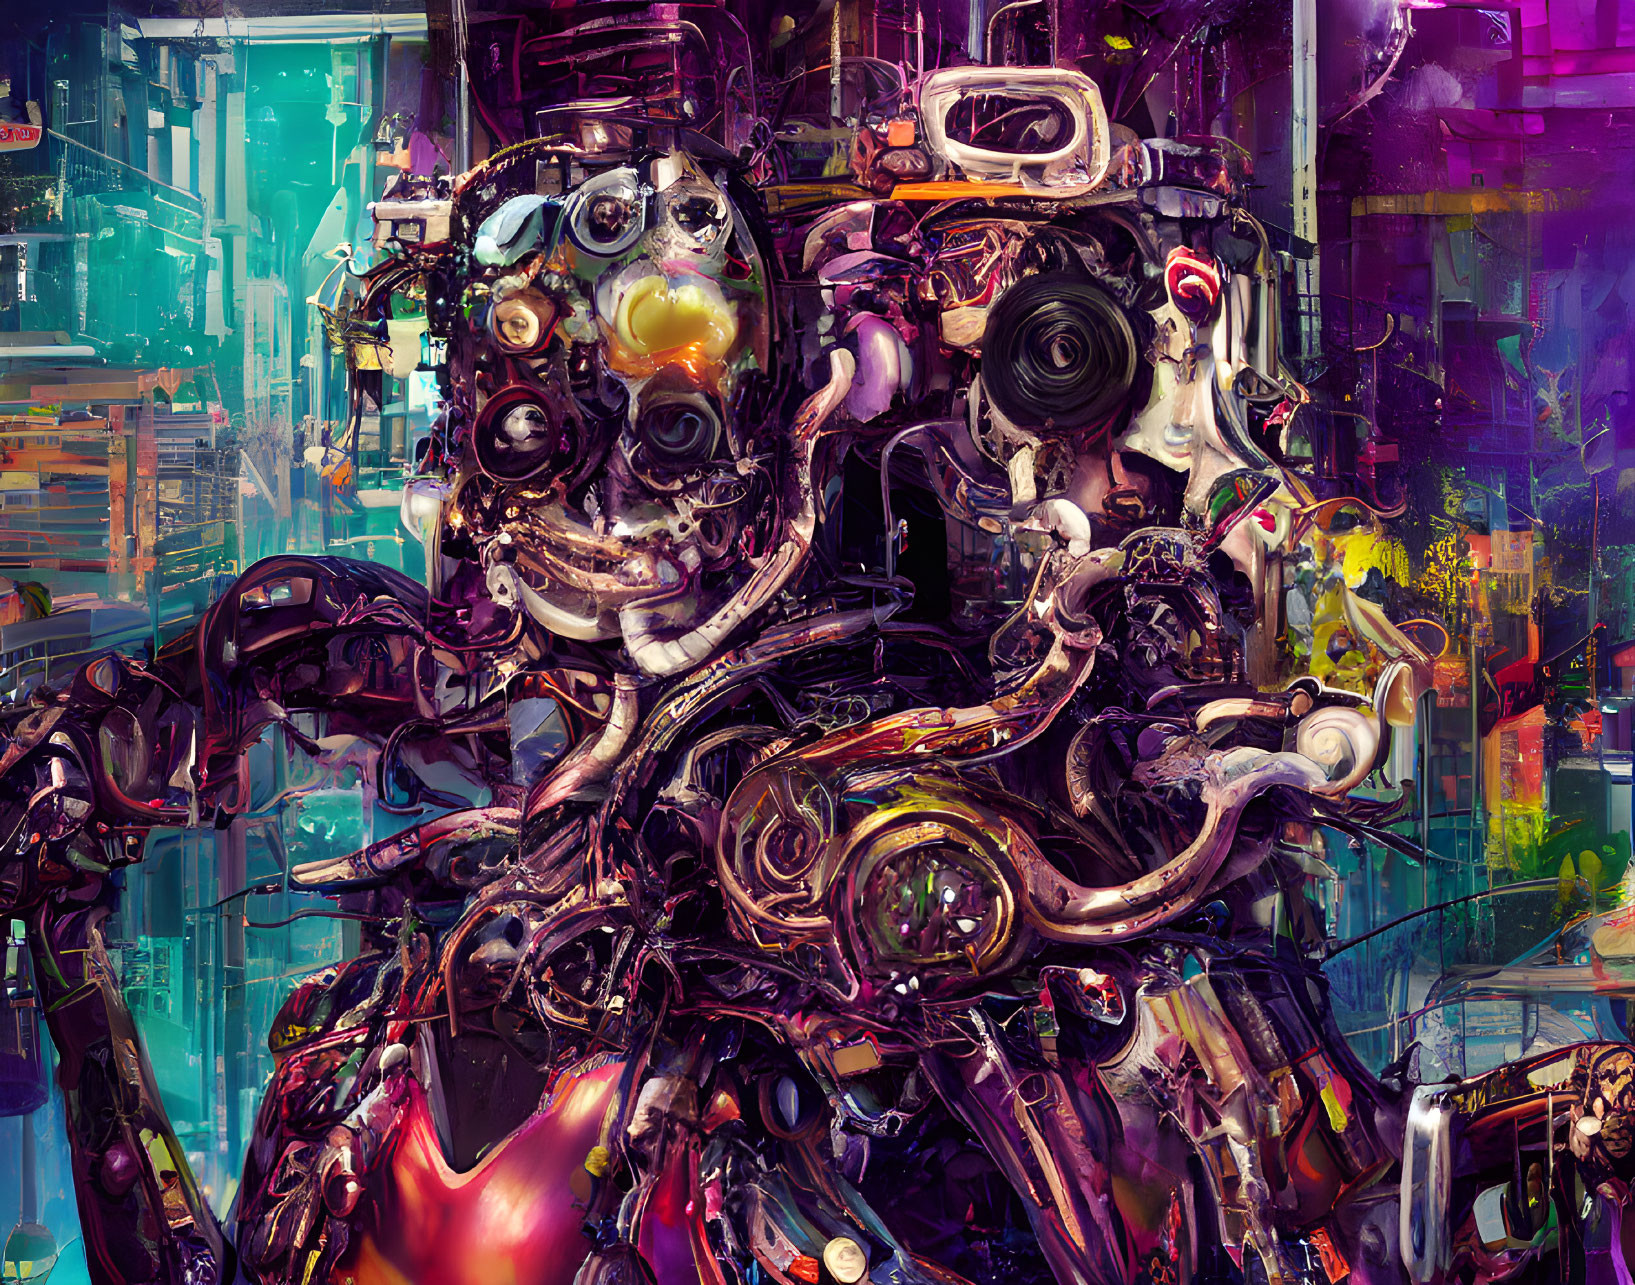 Colorful Cyberpunk Art: Abstract Robotic Figures & Swirling Textures